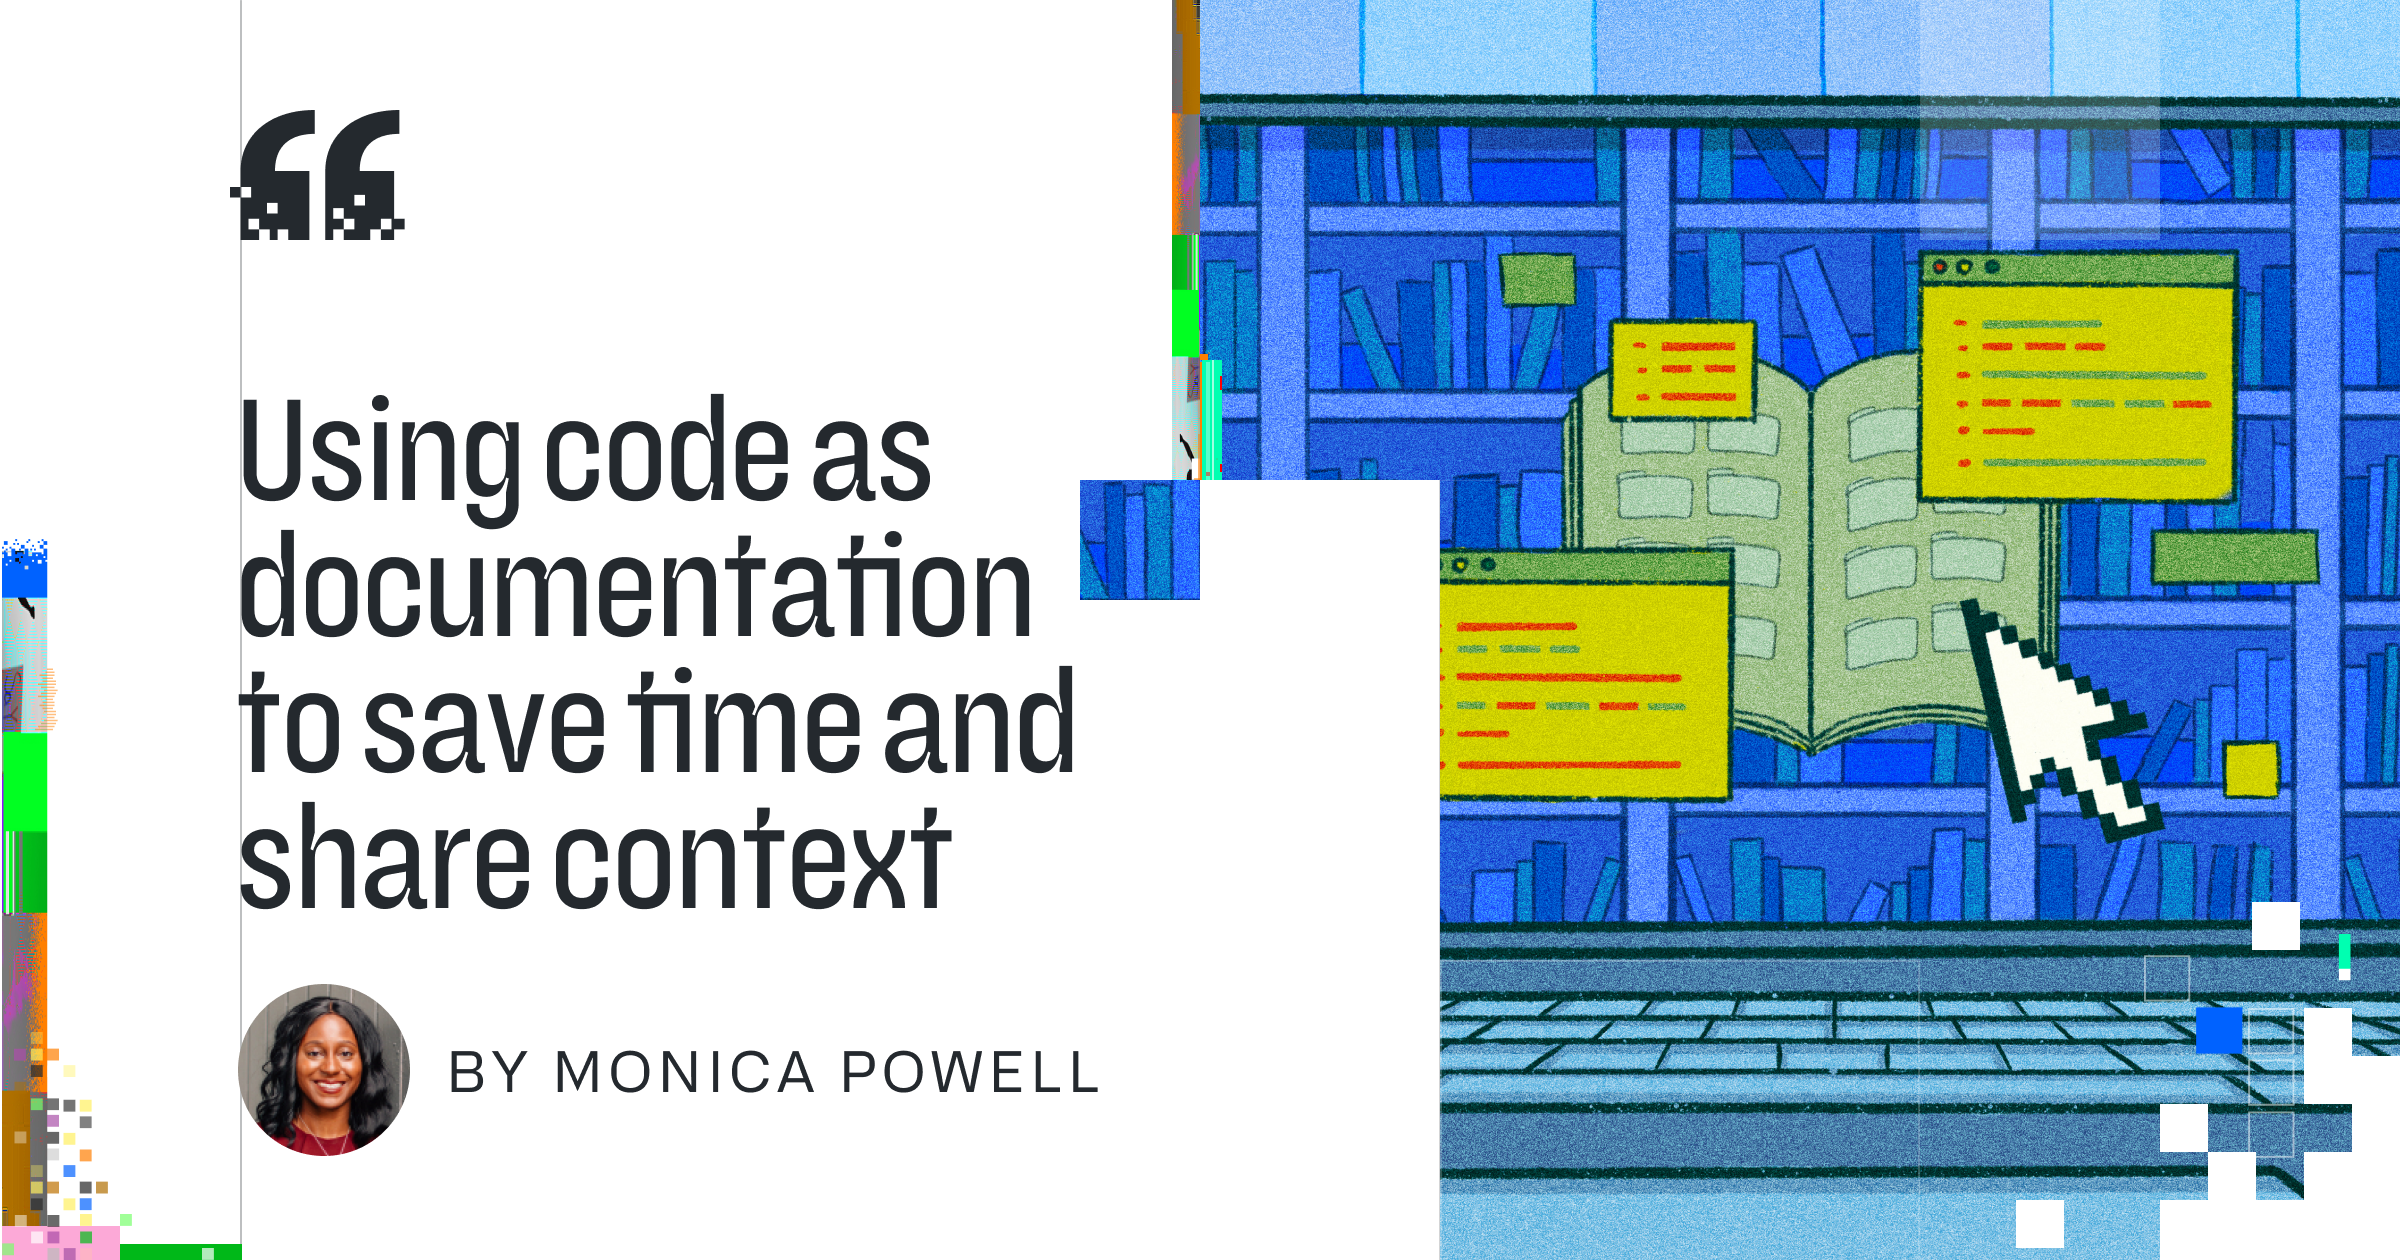 Using code as documentation to save time and share context